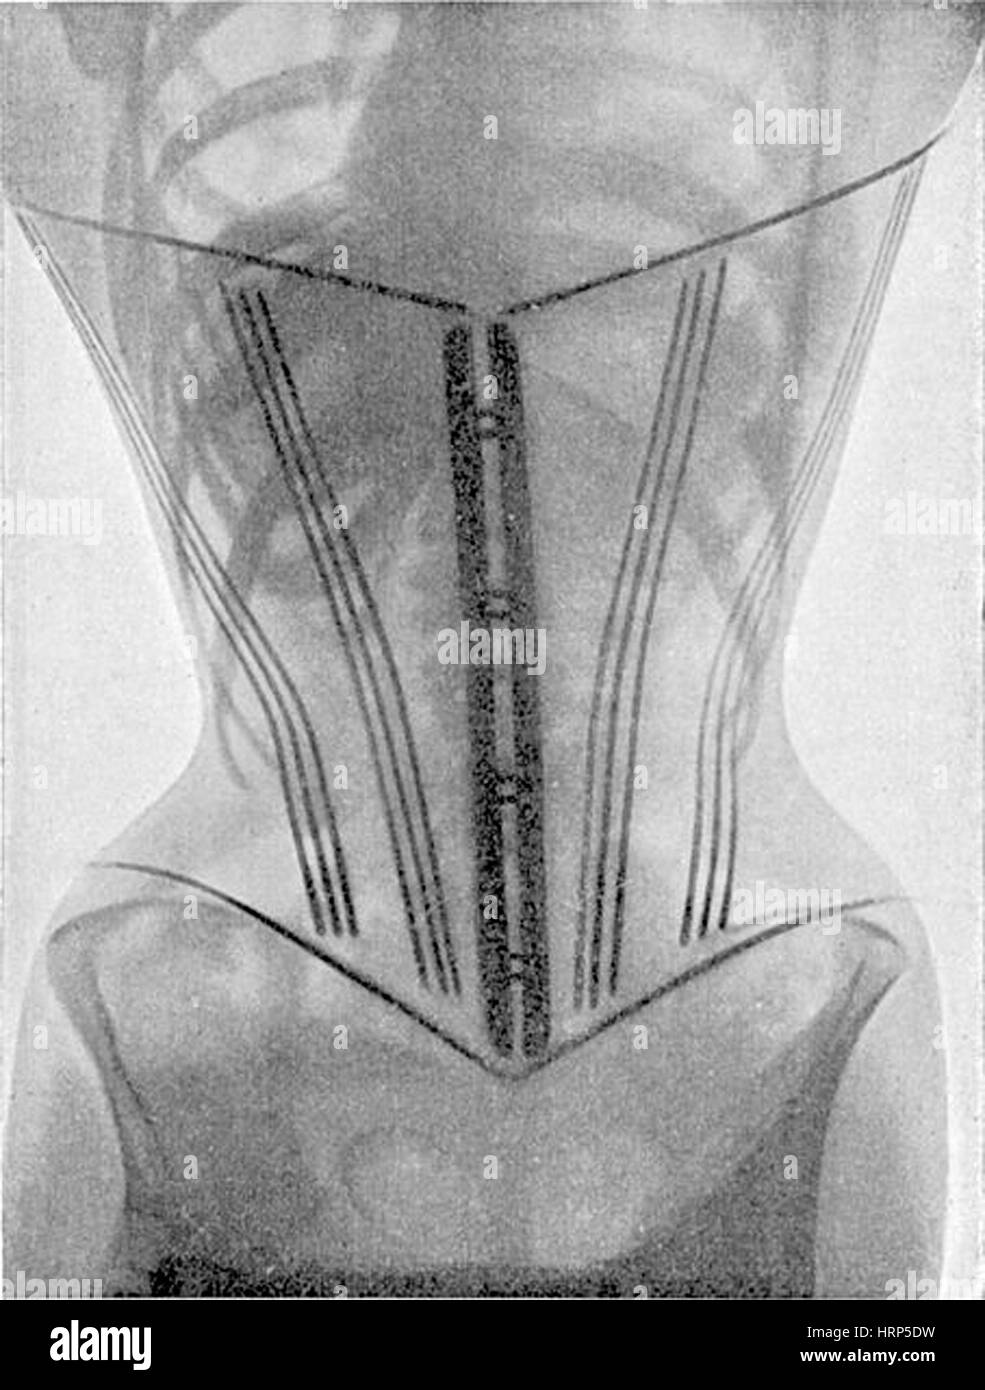 Corset historical Black and White Stock Photos & Images - Alamy